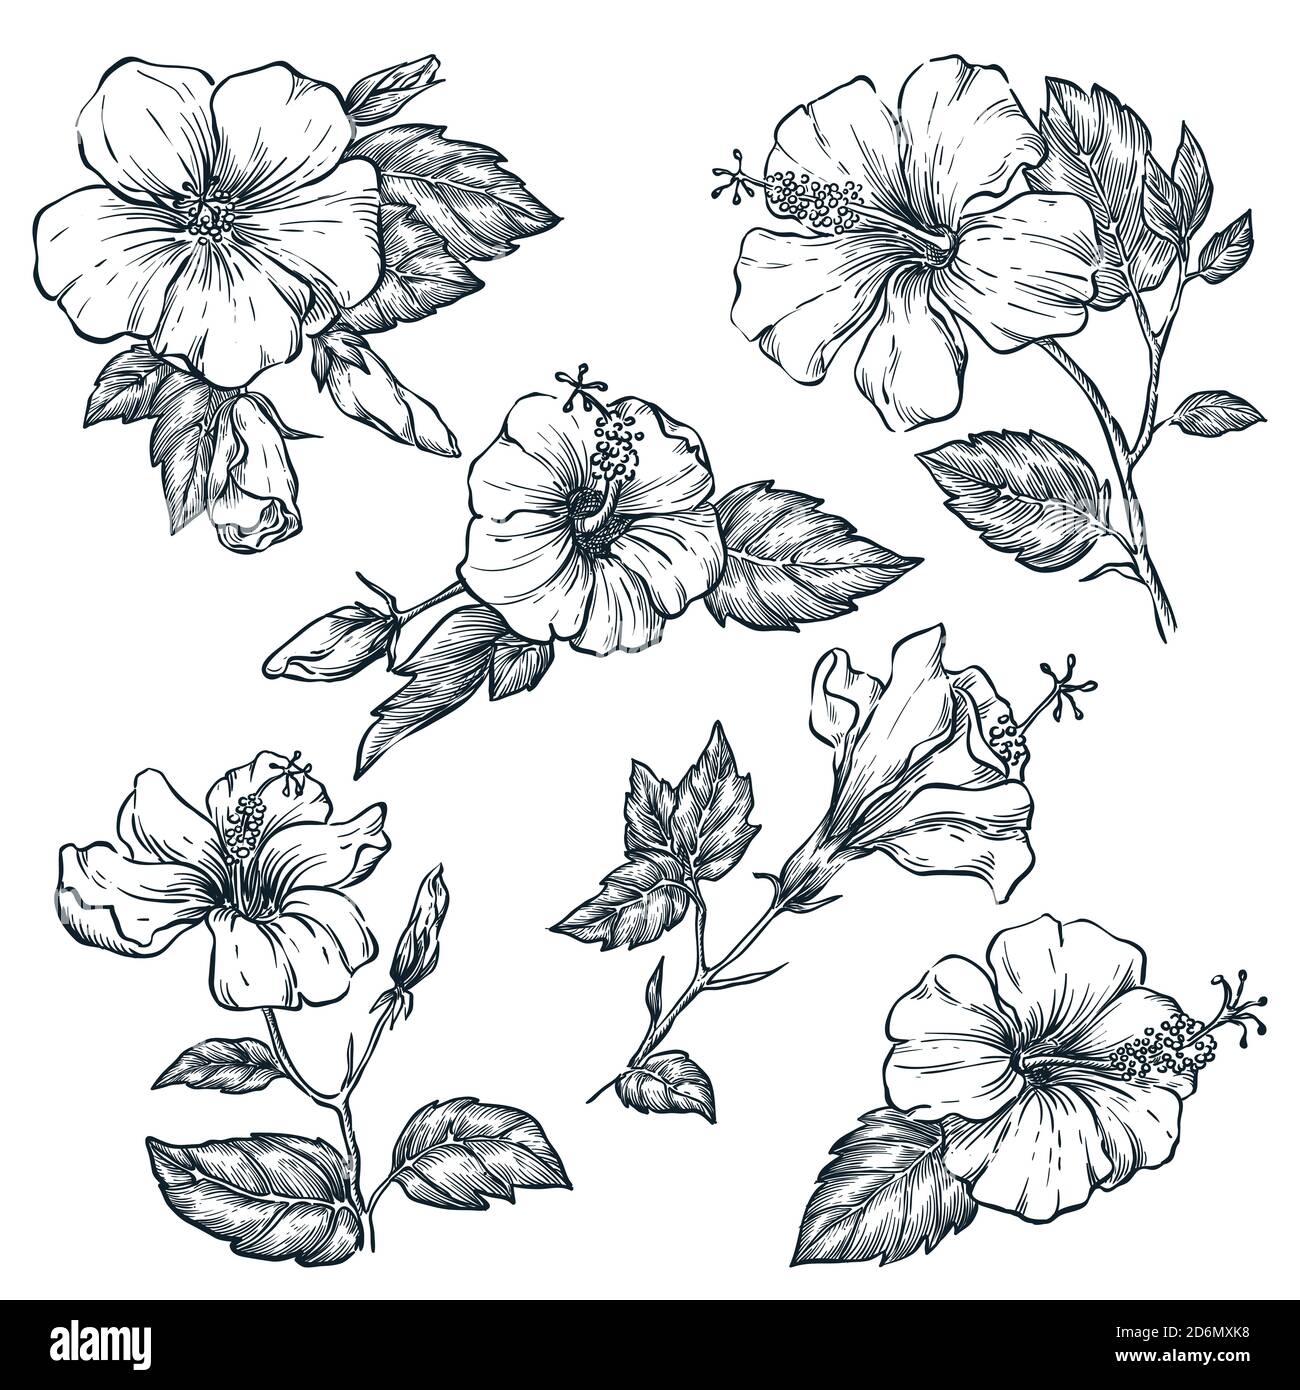 Tropical flowers set, vector sketch illustration. Hand drawn tropic nature and floral design elements. Hibiscus isolated on white background. Stock Vector